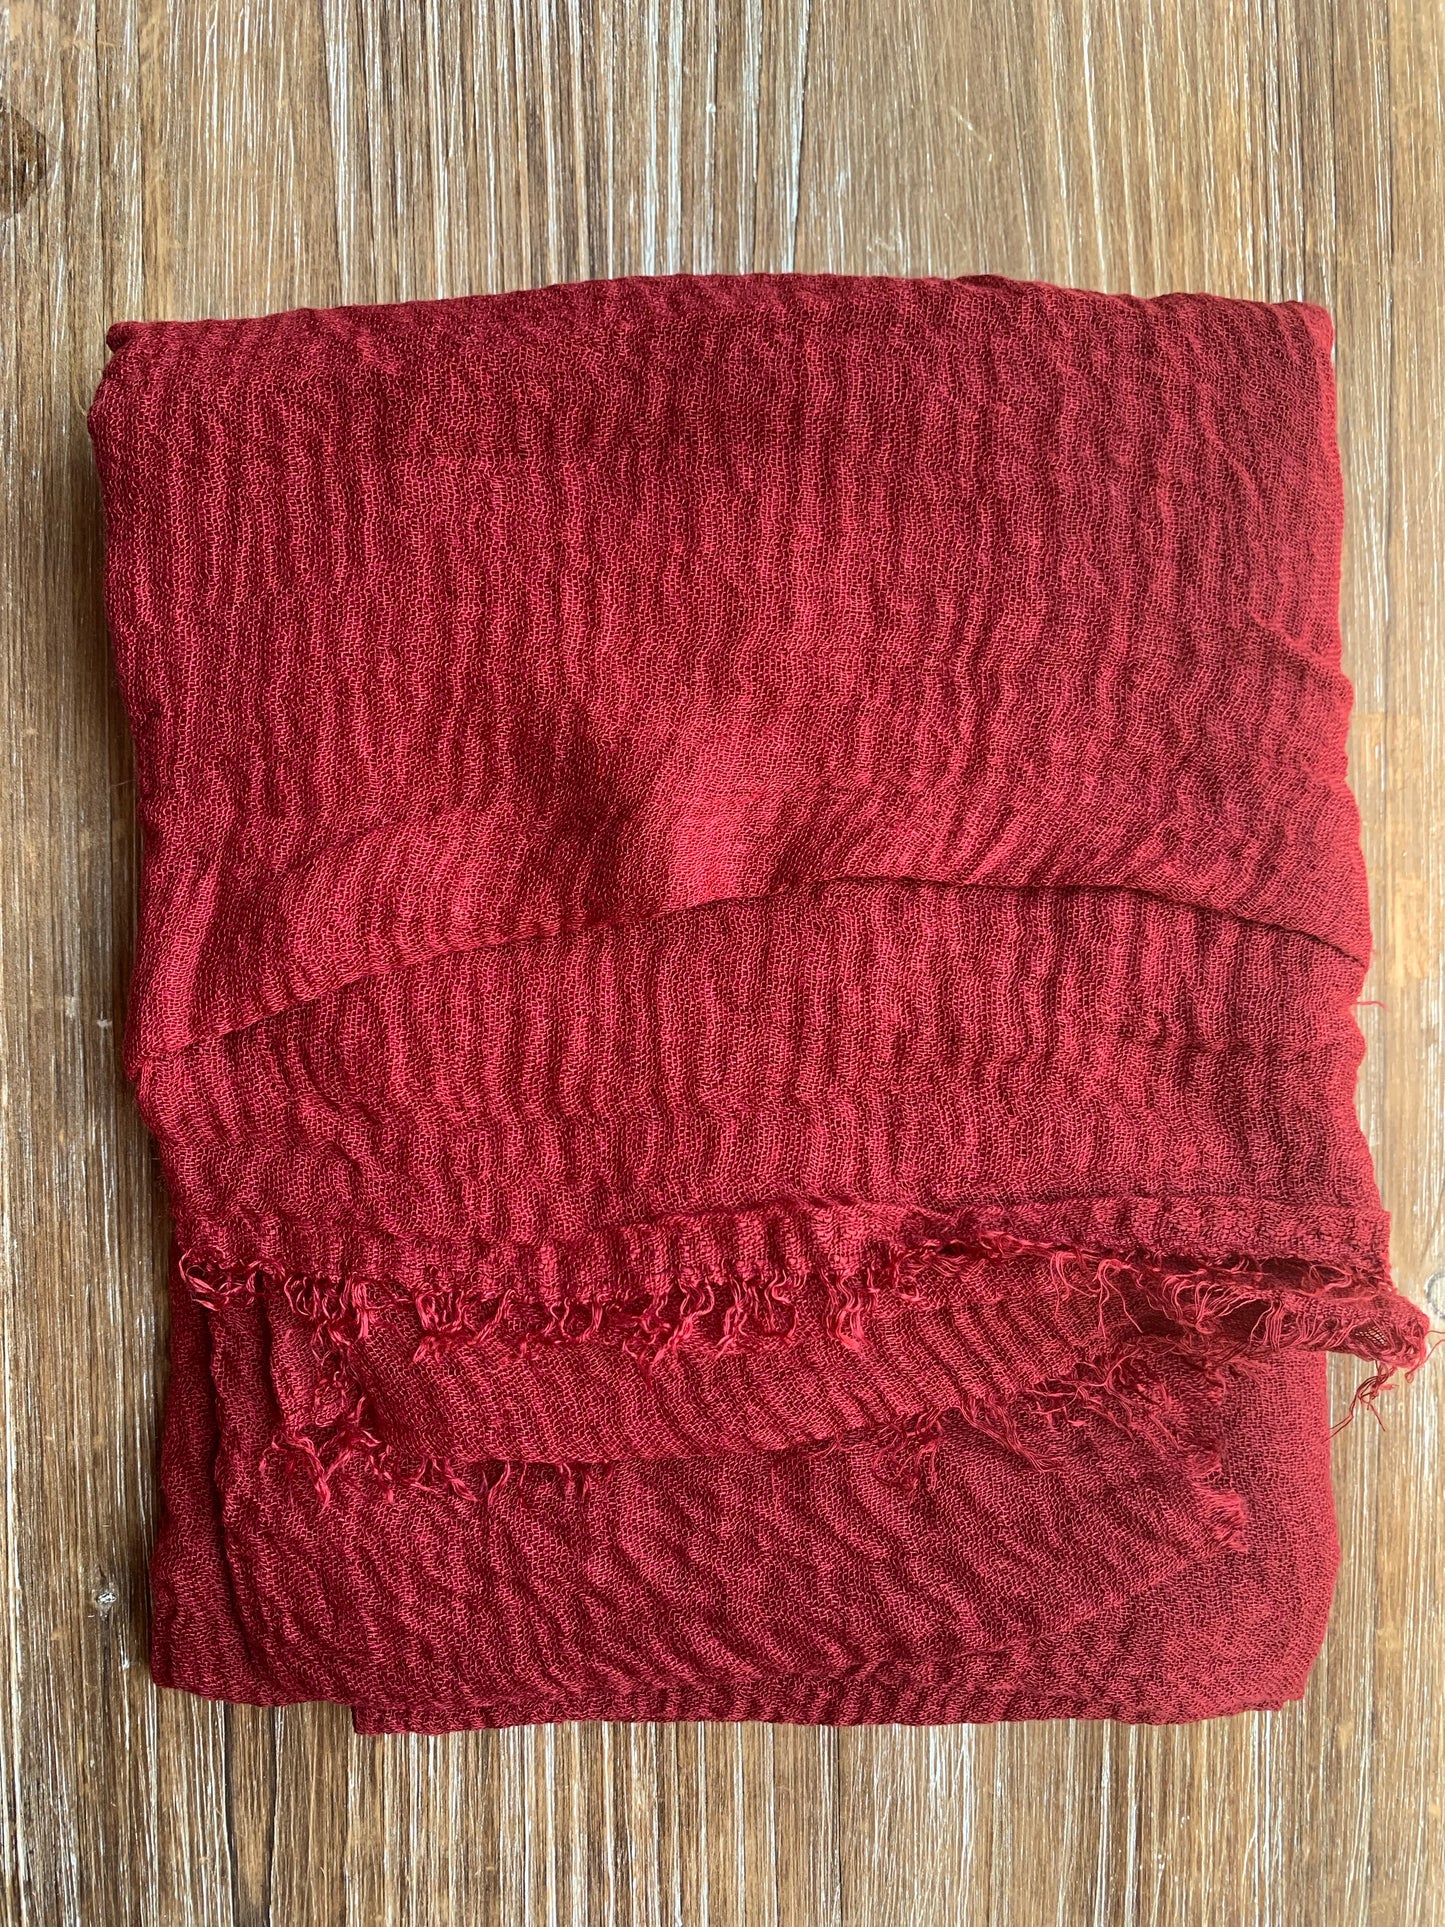 Cherry - Crinkle Organic Cotton Scarf - The Untitled Project